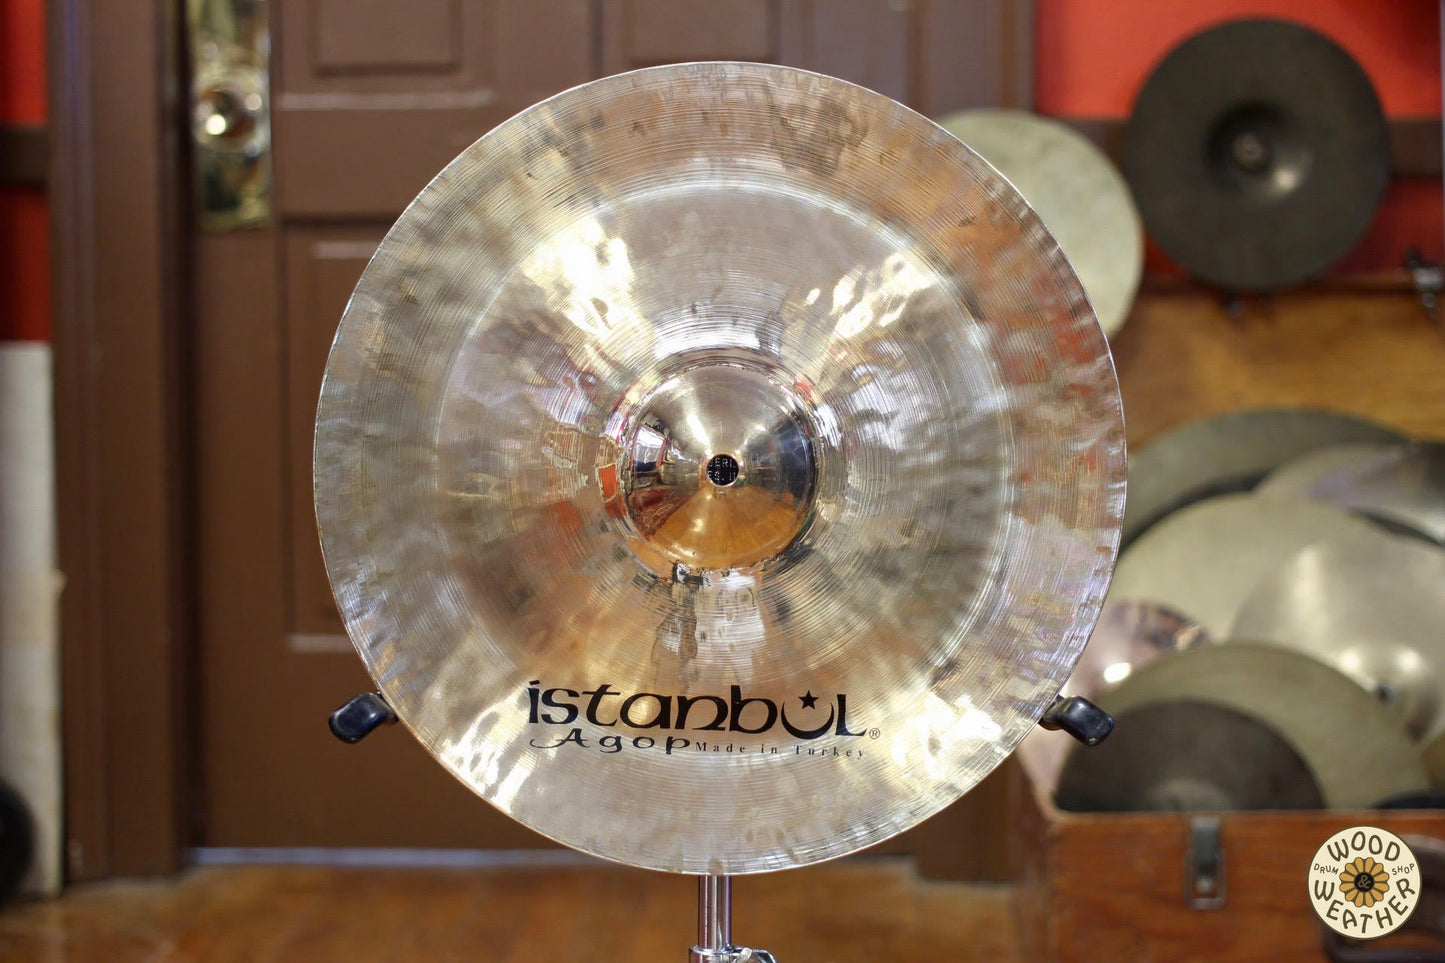 USED Istanbul Agop 14" Xist Power China Cymbal 622g